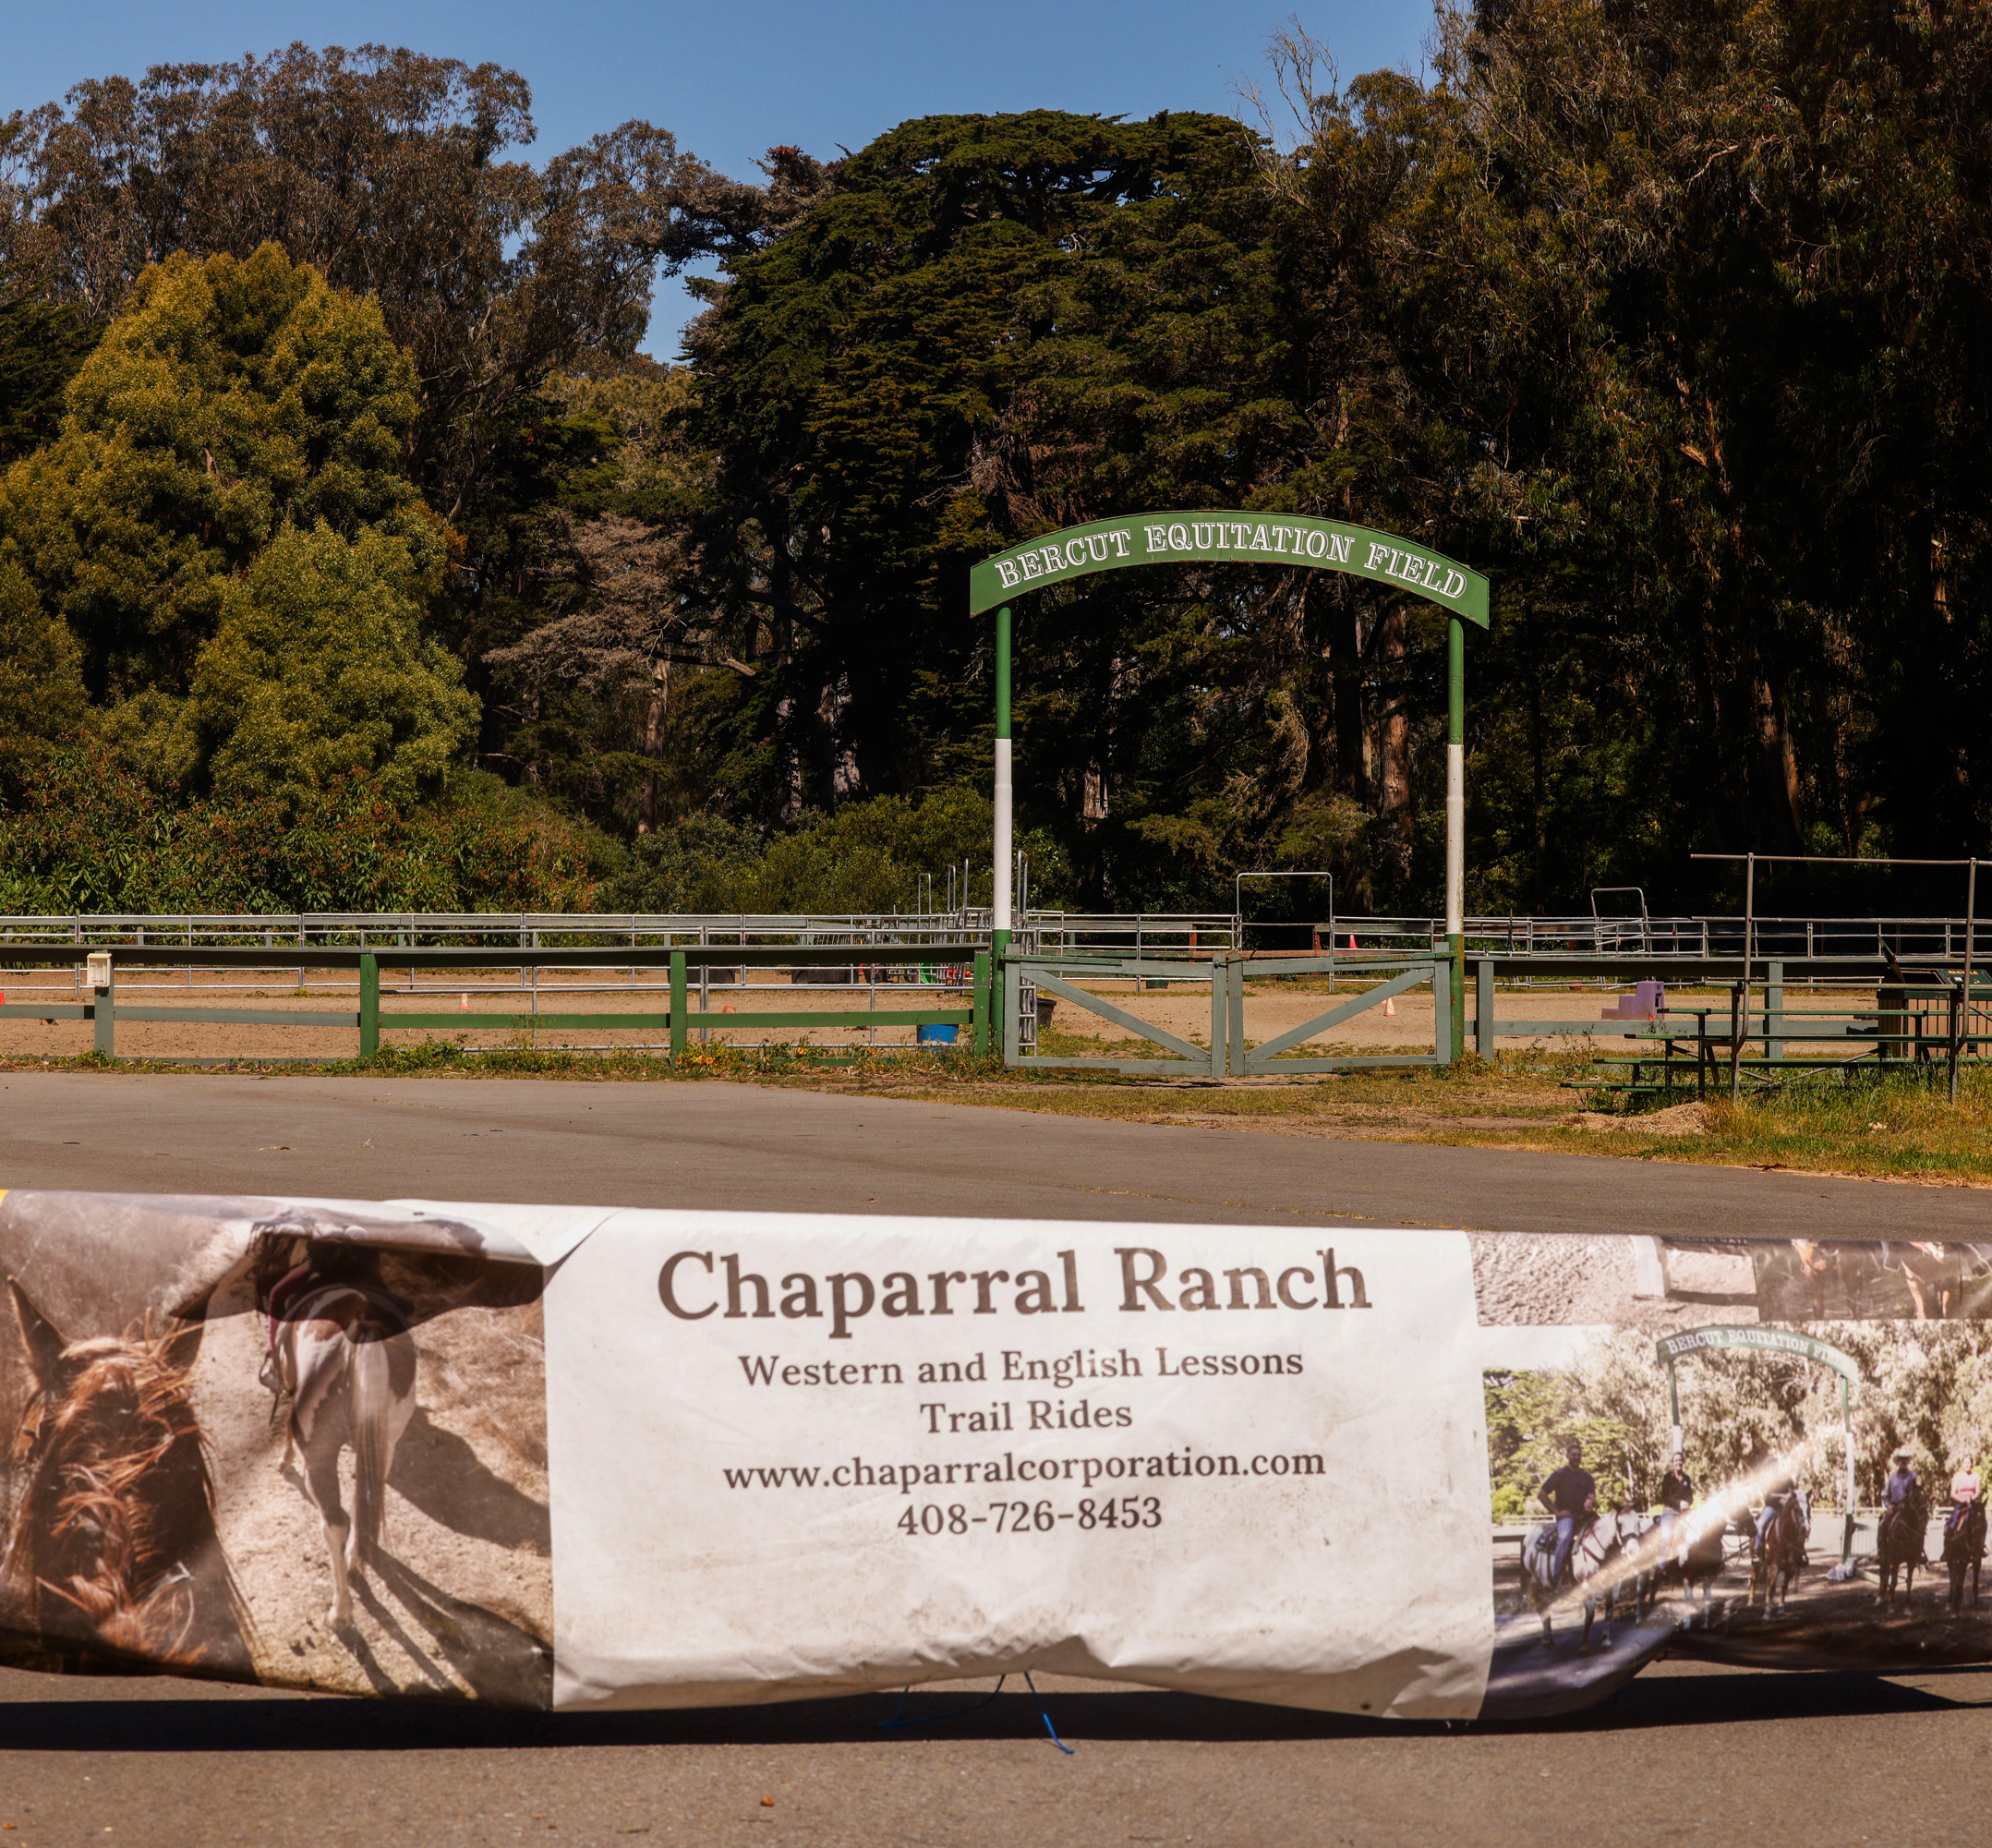 The image shows an arch labeled &quot;Bercut Equitation Field&quot; at the entrance to an equine field framed by trees, and a weathered banner for &quot;Chaparral Ranch&quot; in the foreground.